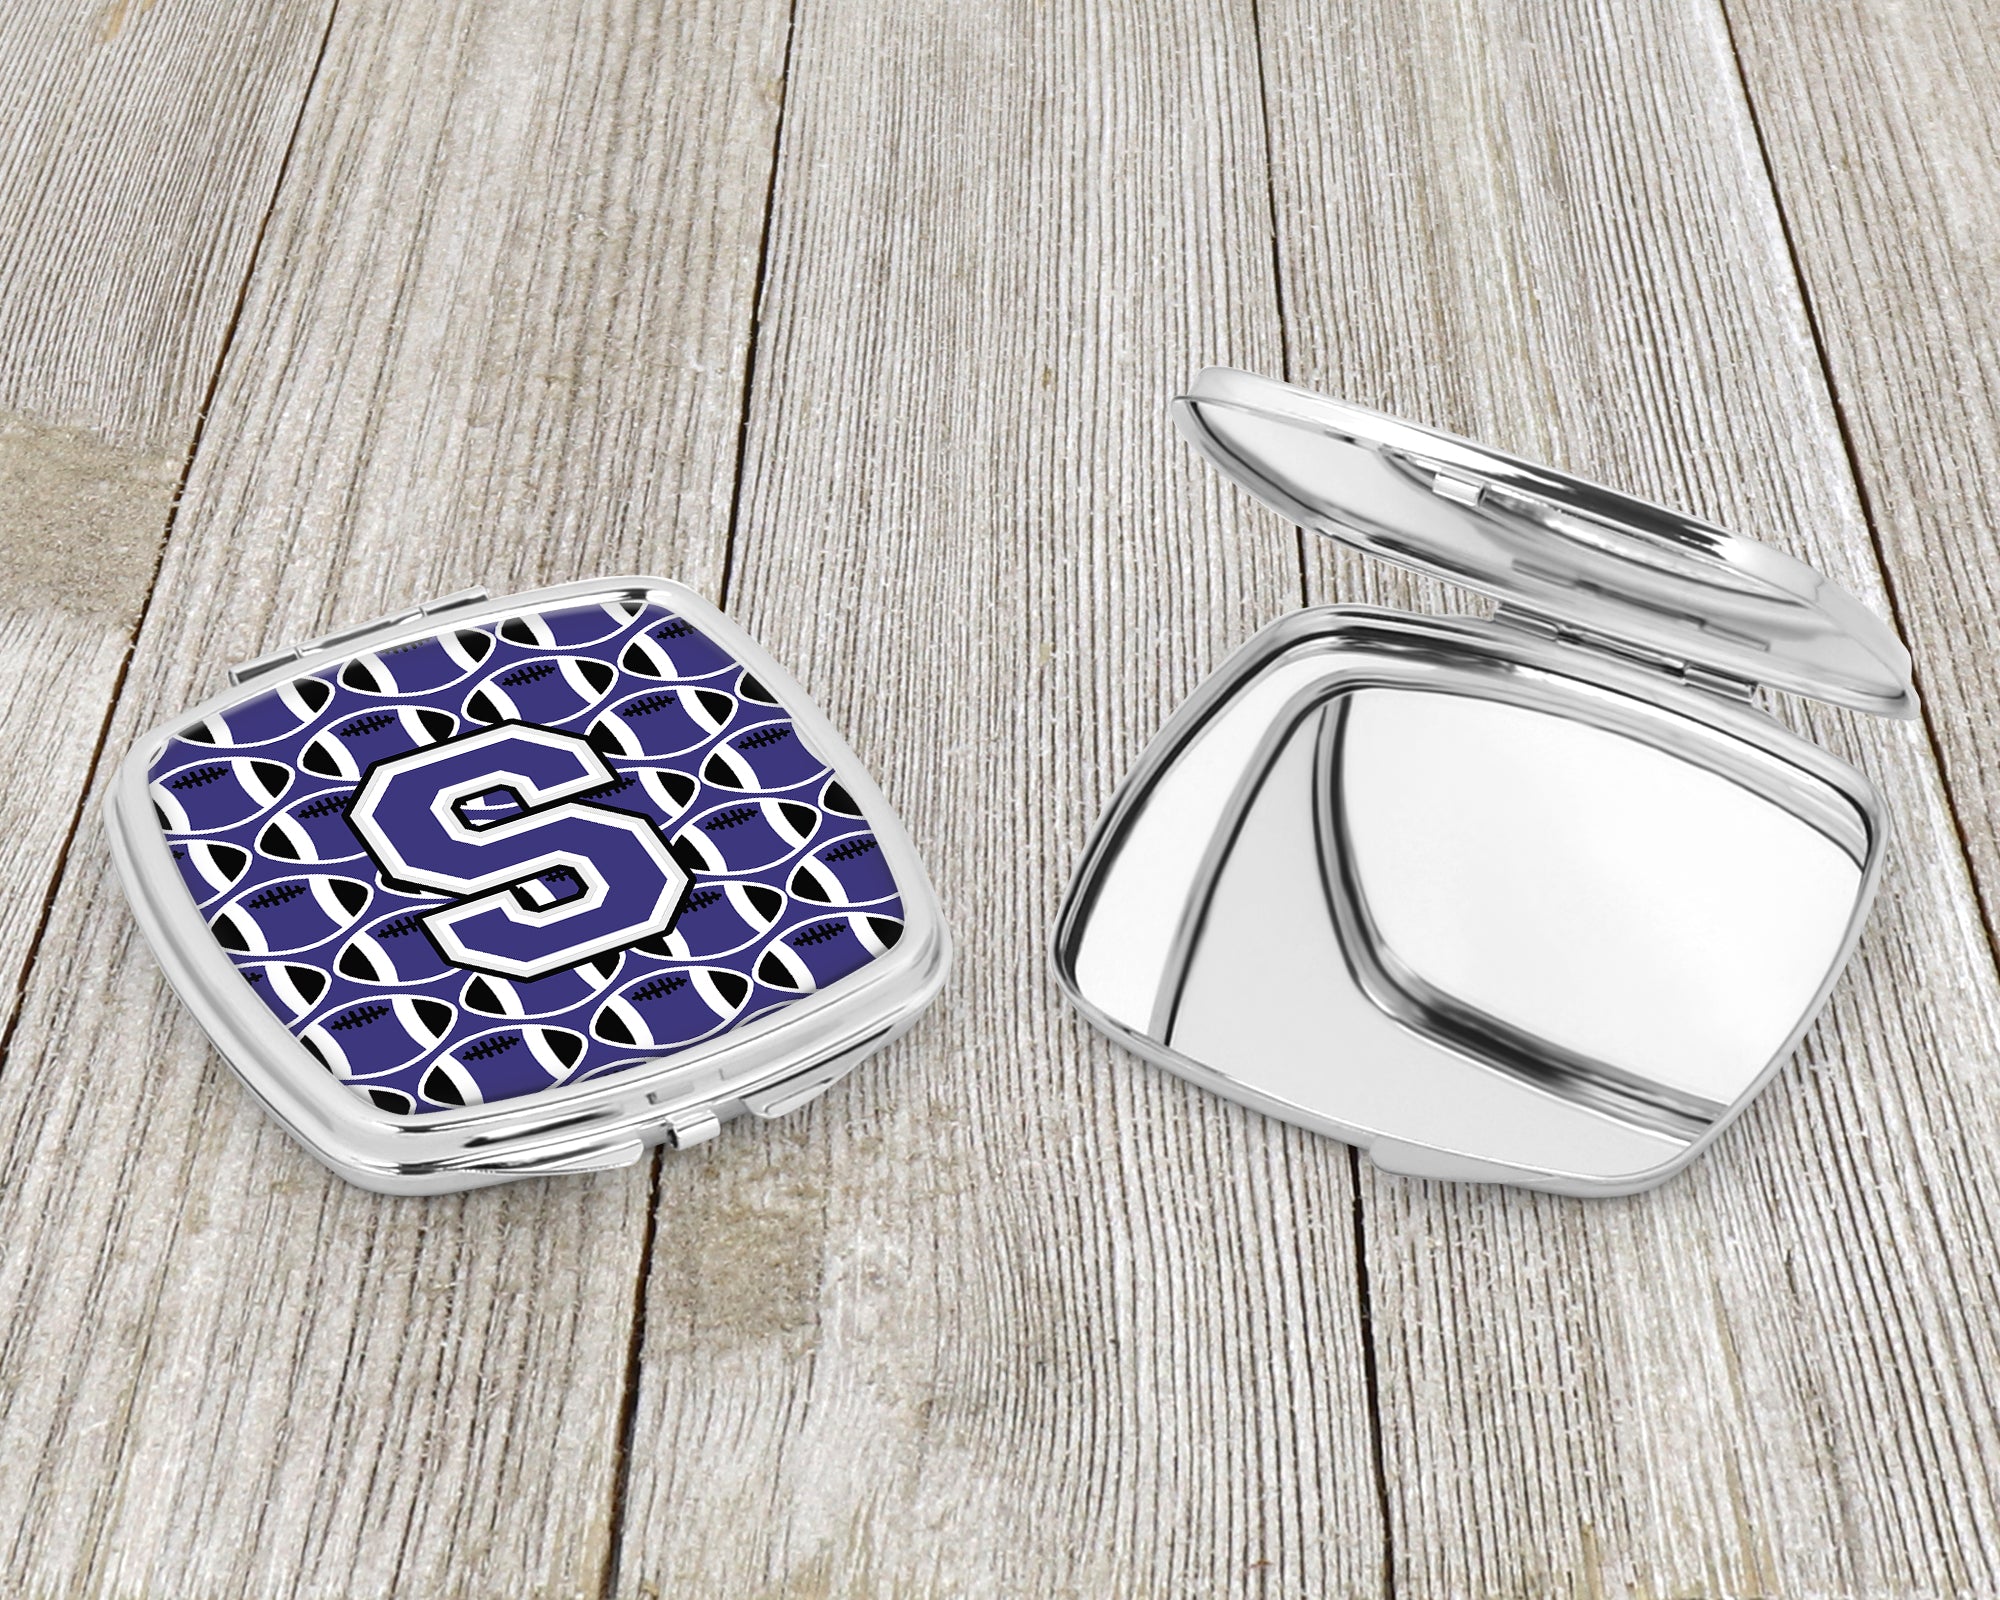 Letter S Football Purple and White Compact Mirror CJ1068-SSCM  the-store.com.